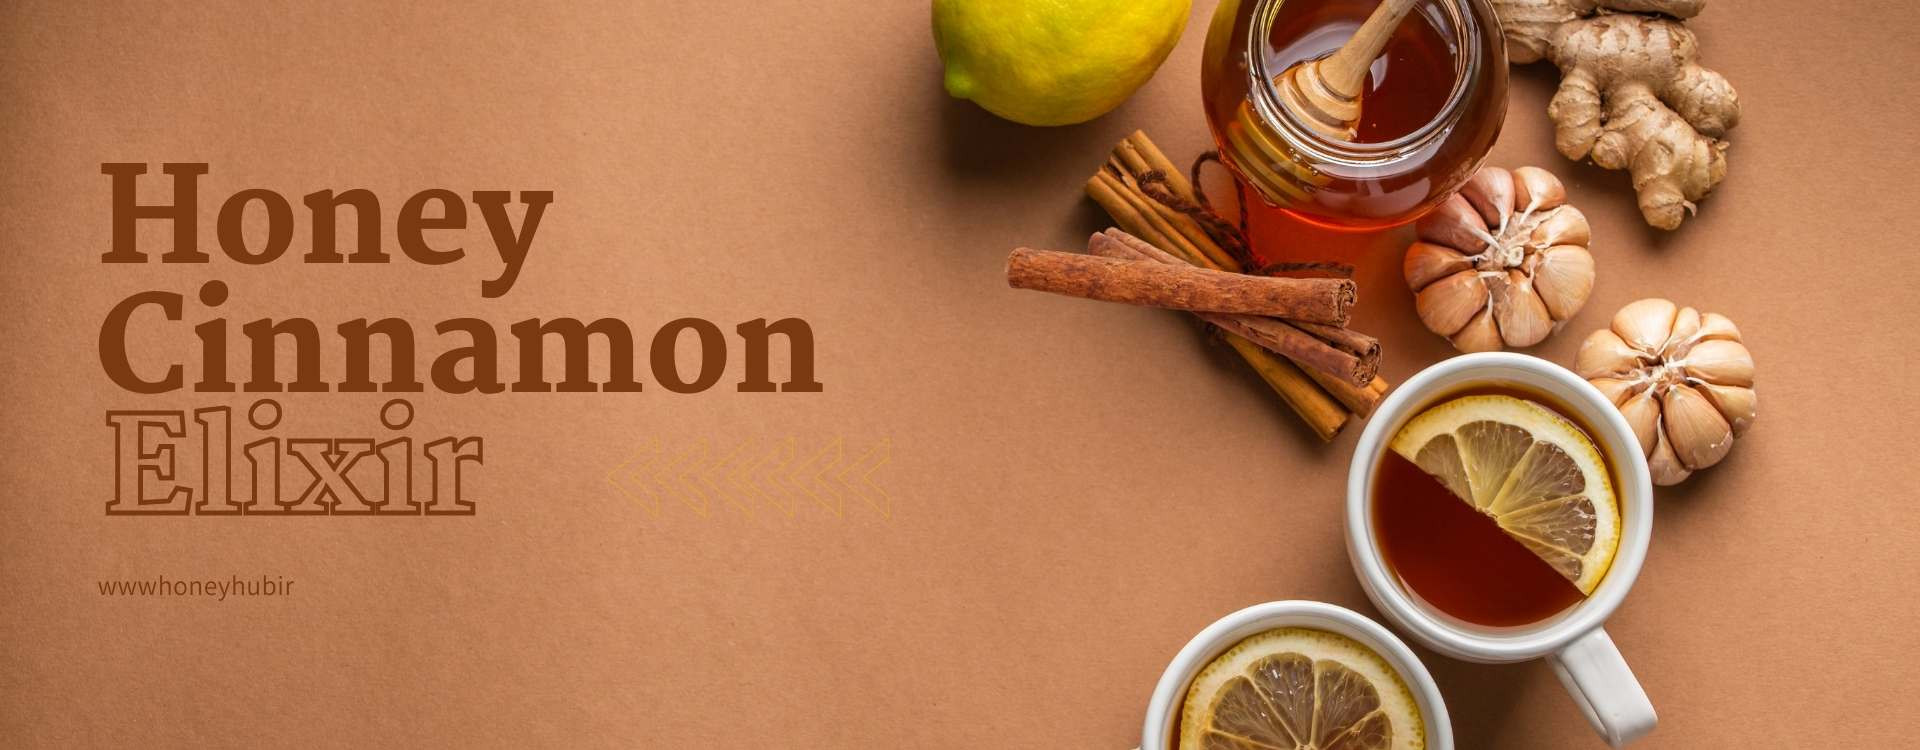 Honey and Cinnamon Paste: A Natural Remedy for Your Health